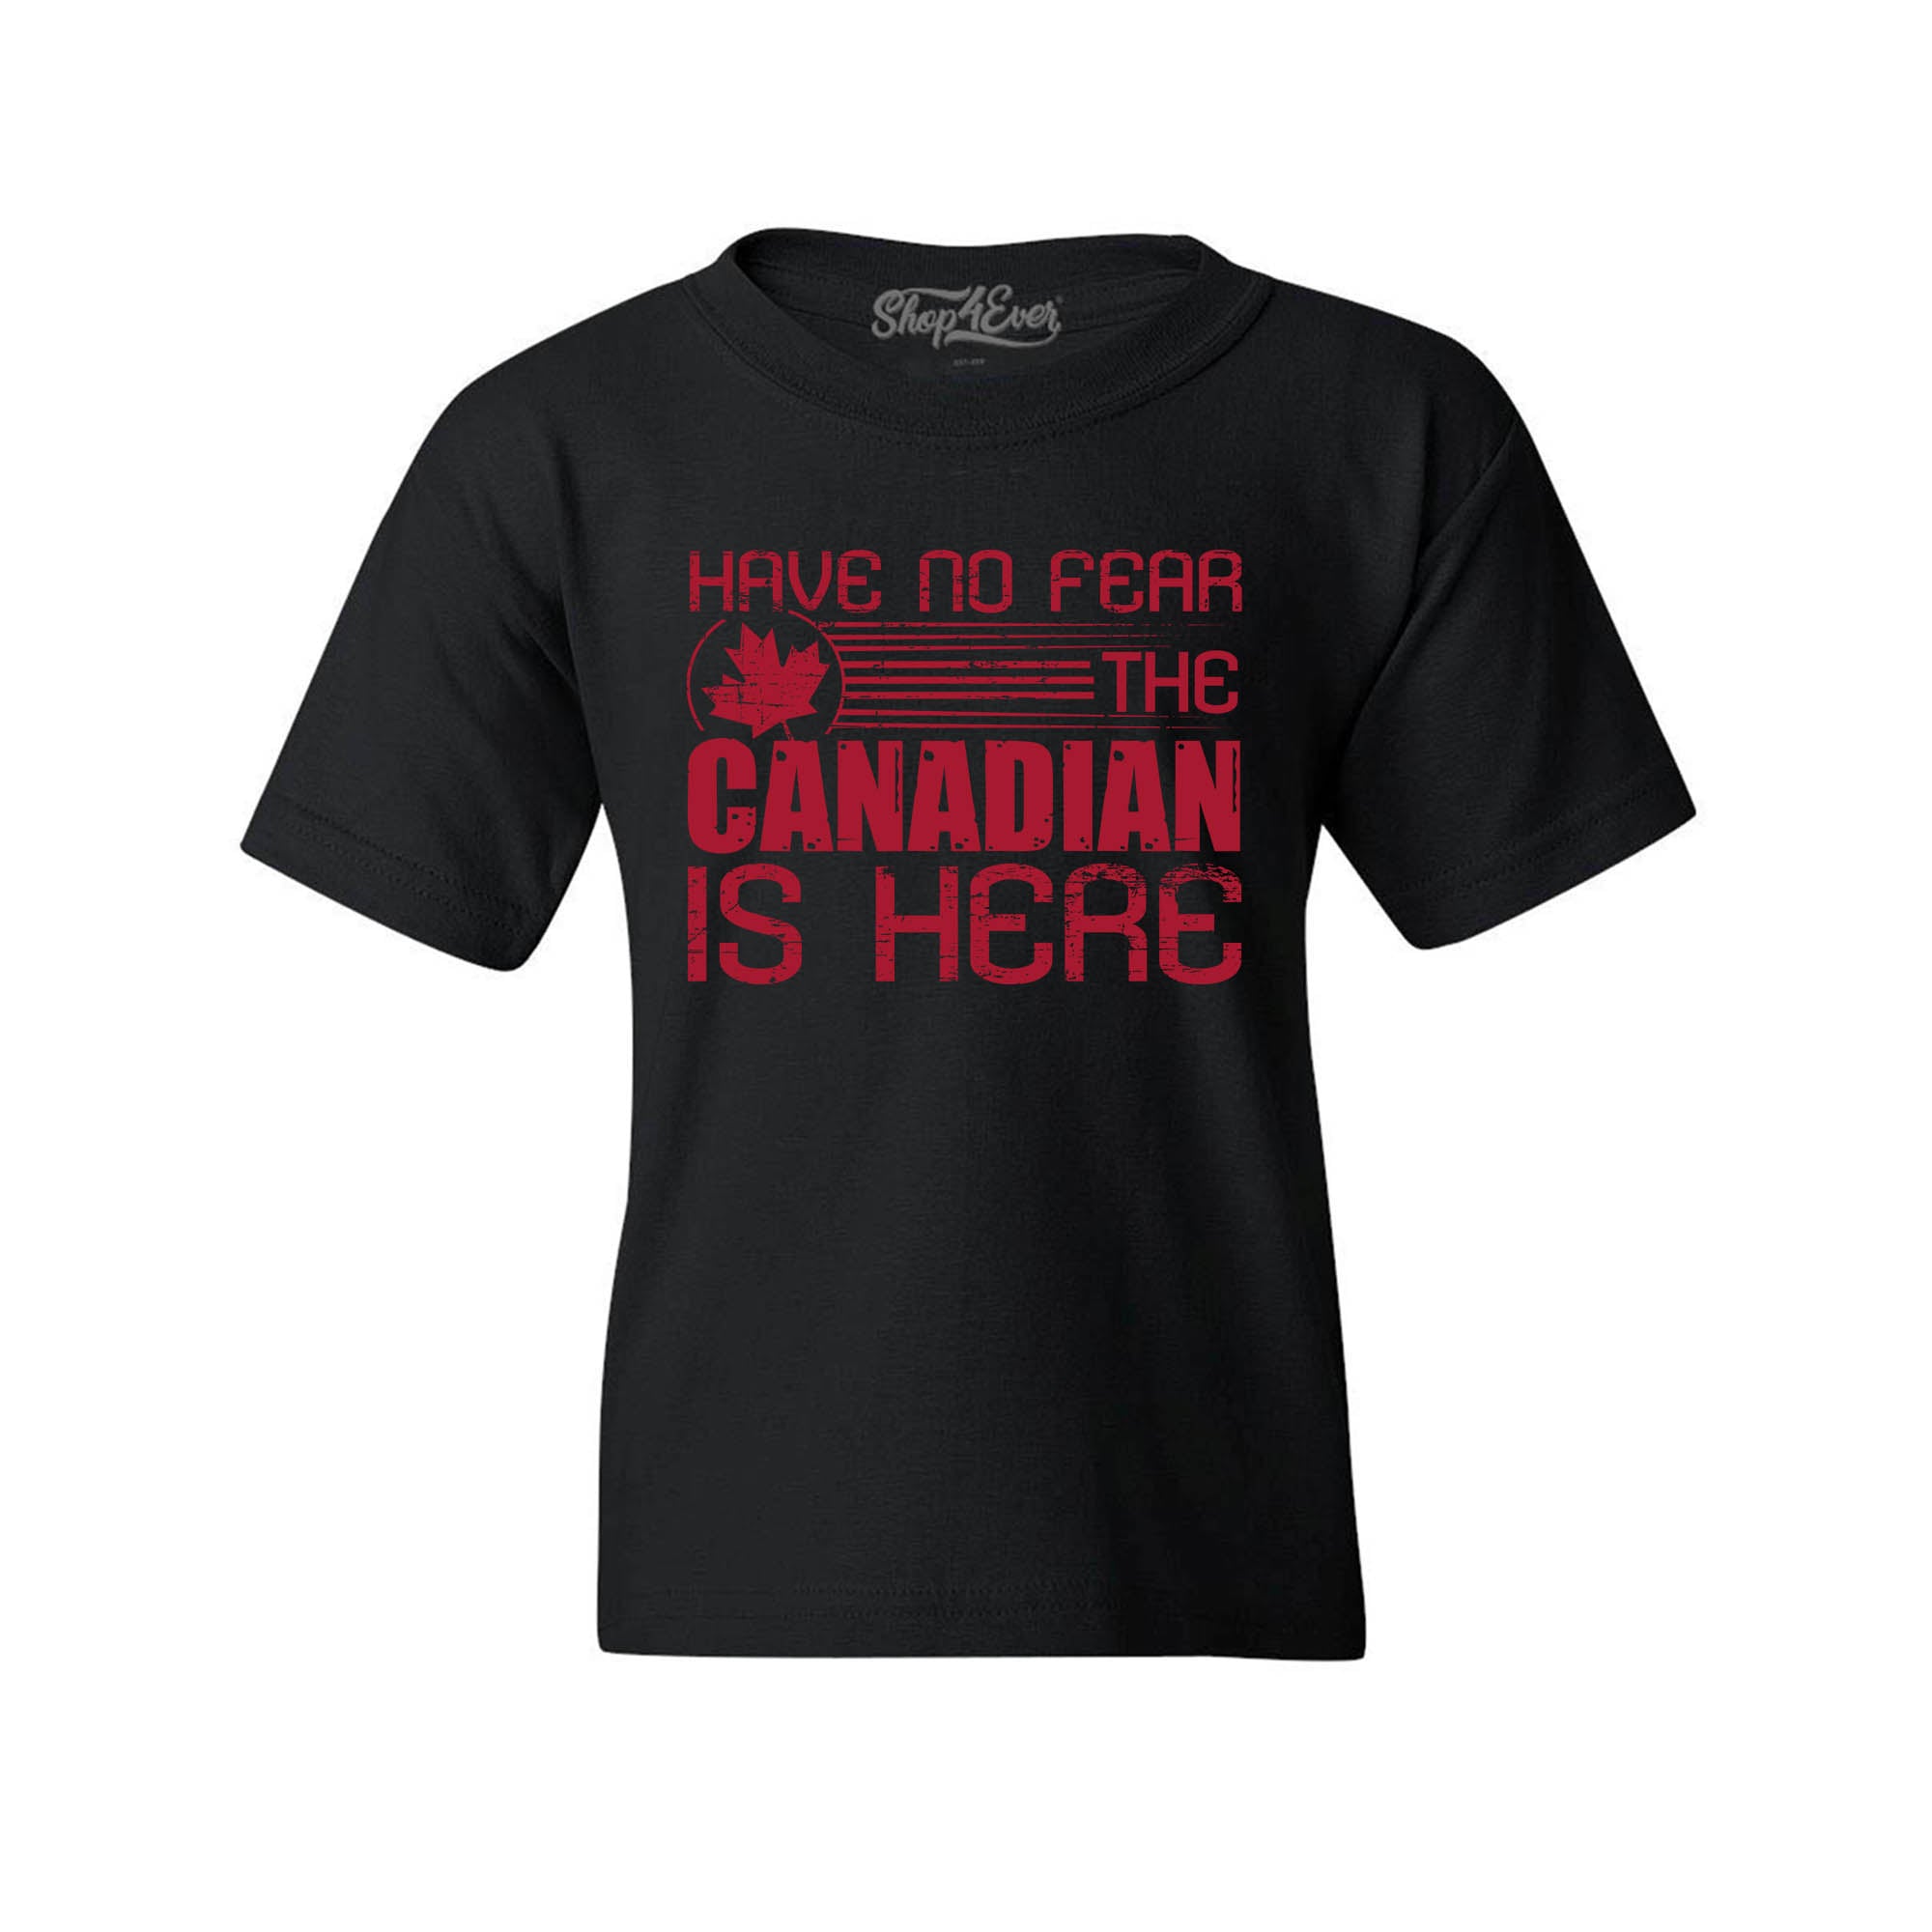 Have No Fear The Canadian is Here Canada Pride Child's T-Shirt Kids Tee